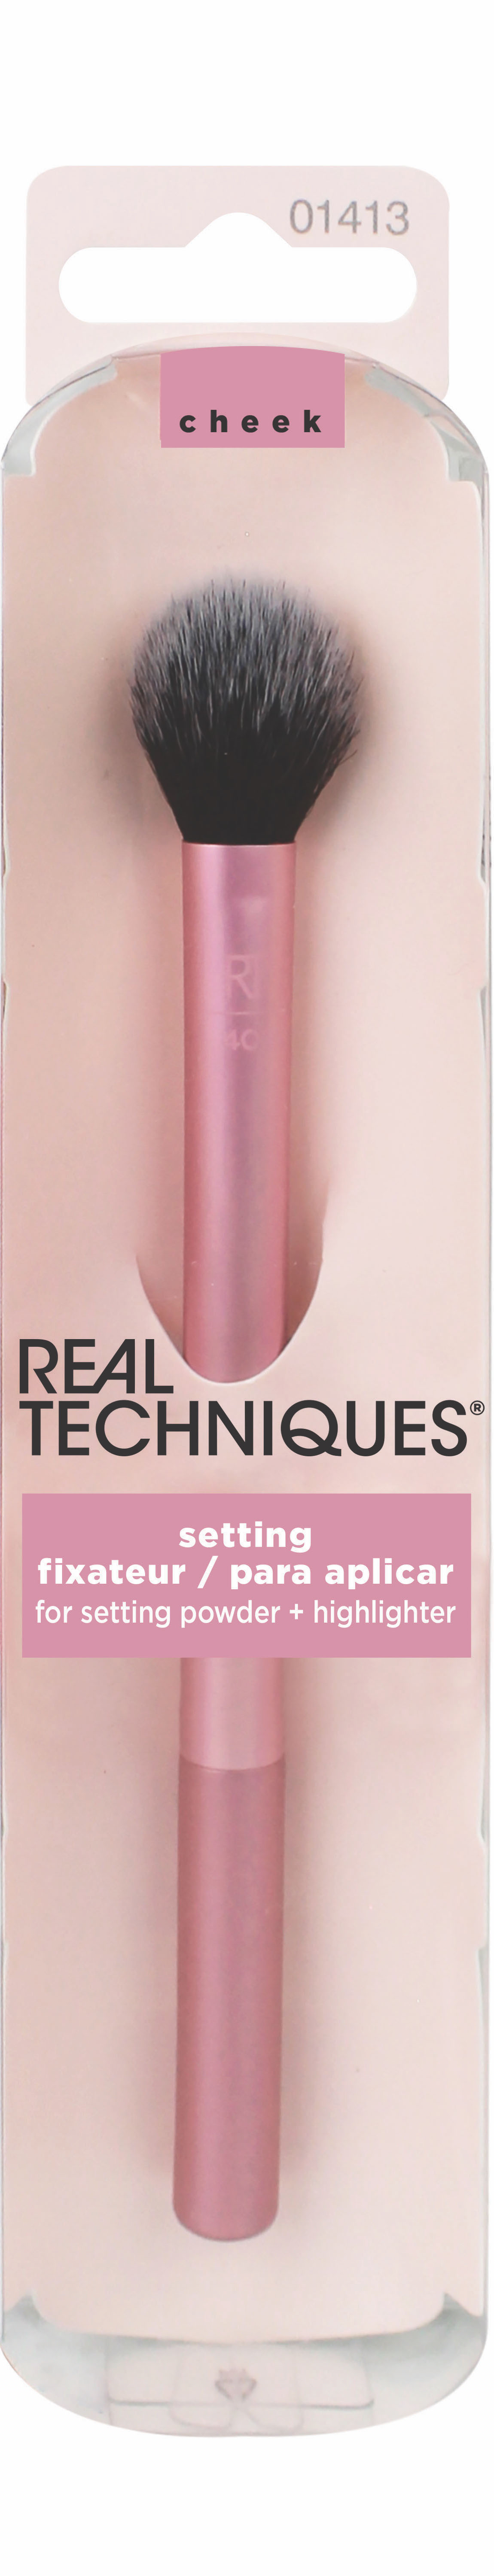 Real Techniques Original Collection Setting Brush